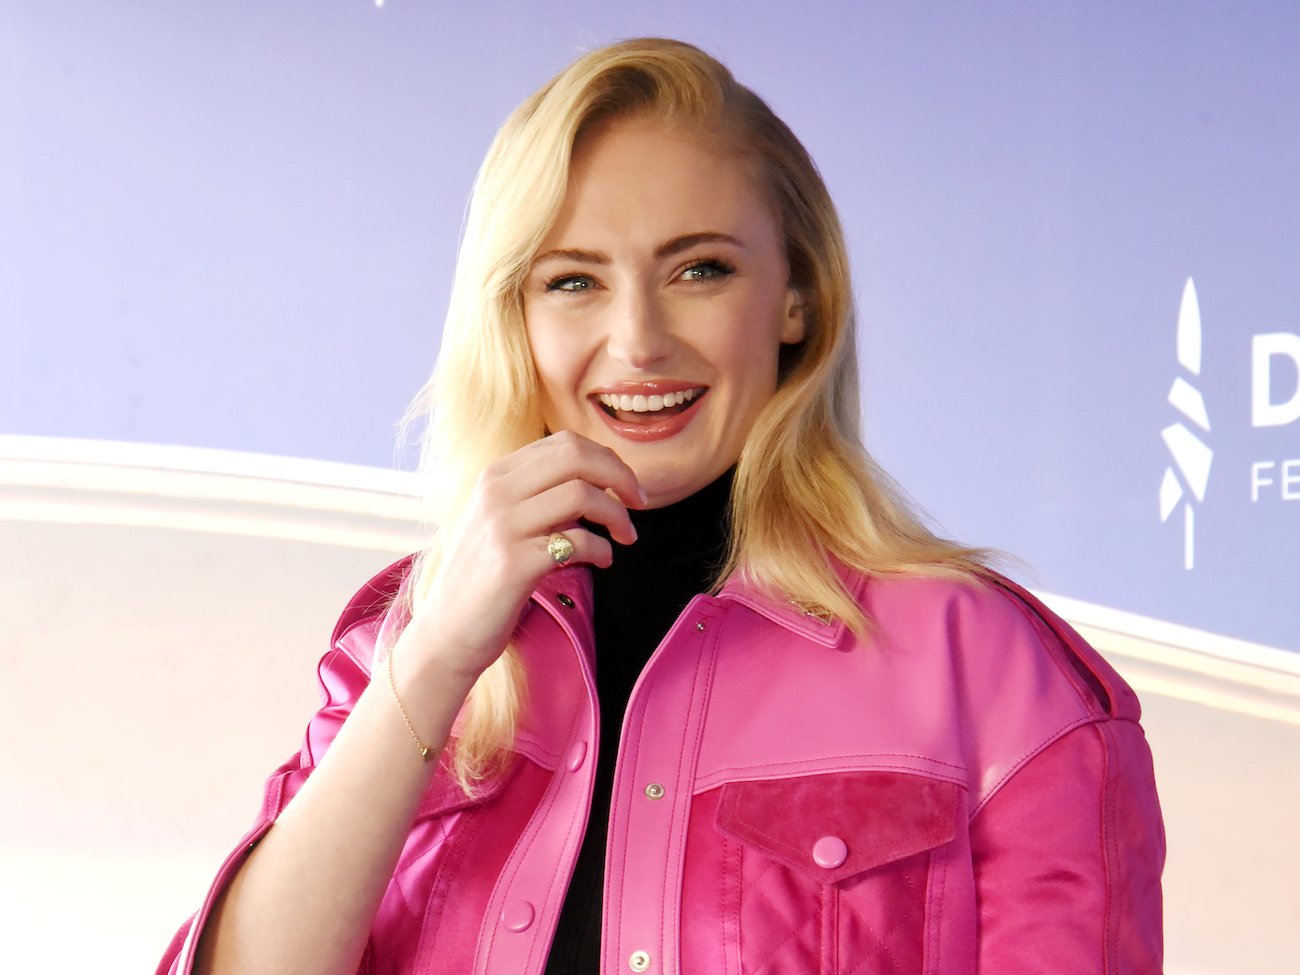 Sophie Turner, who is expecting her second baby, wearing a pink jacket and smiling